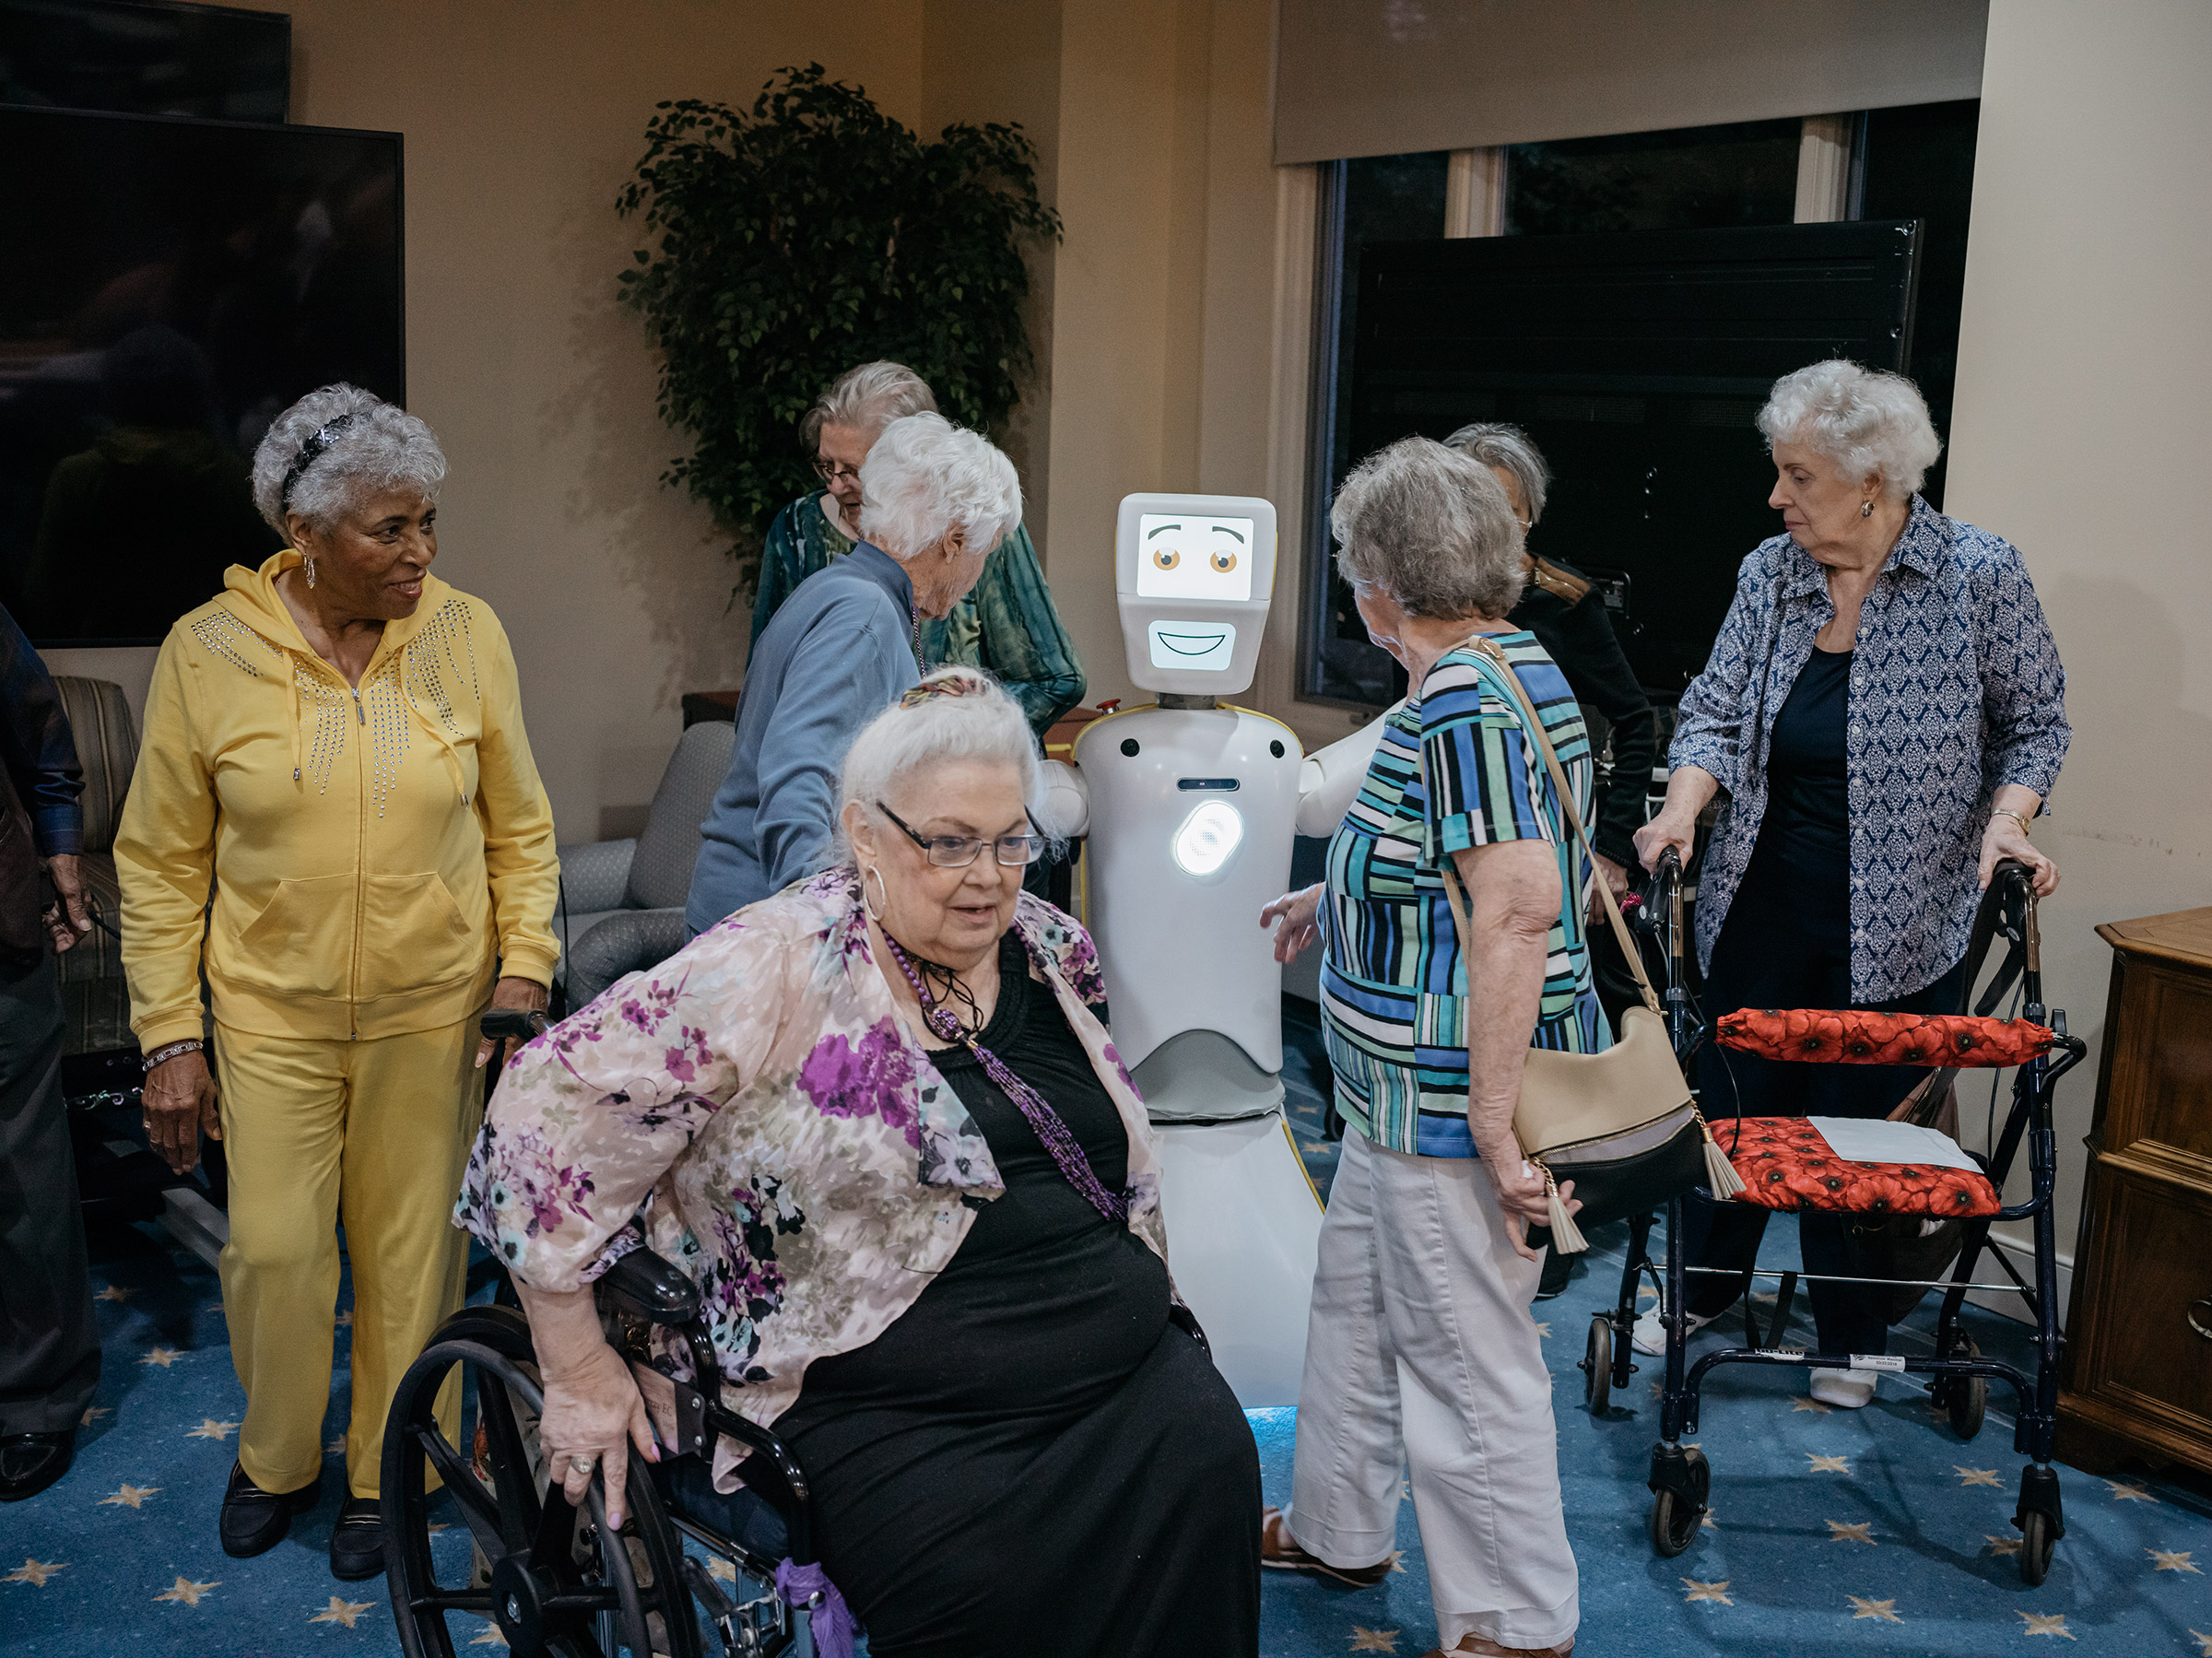 The Robot That Could Change the Senior Care Industry | Time